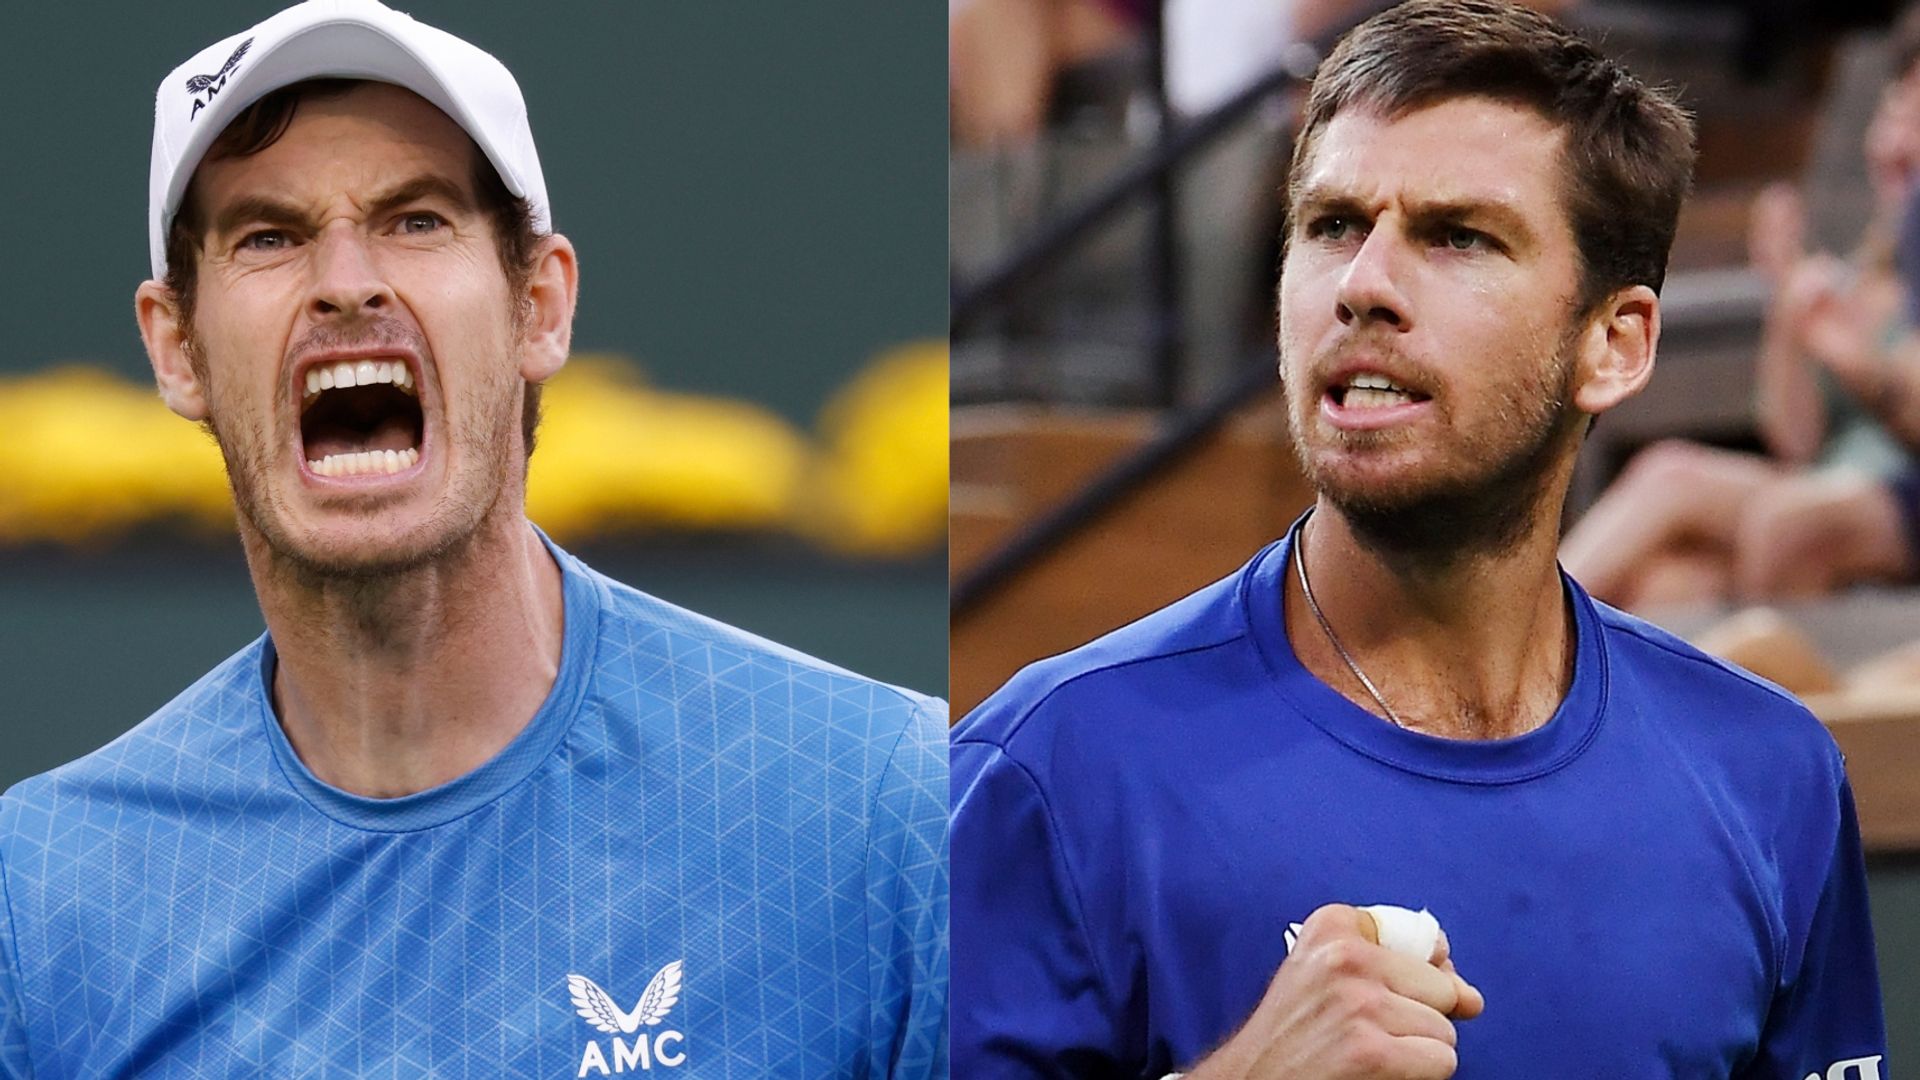 Paris Masters: Latest Scores with Murray in action today after Norrie wins